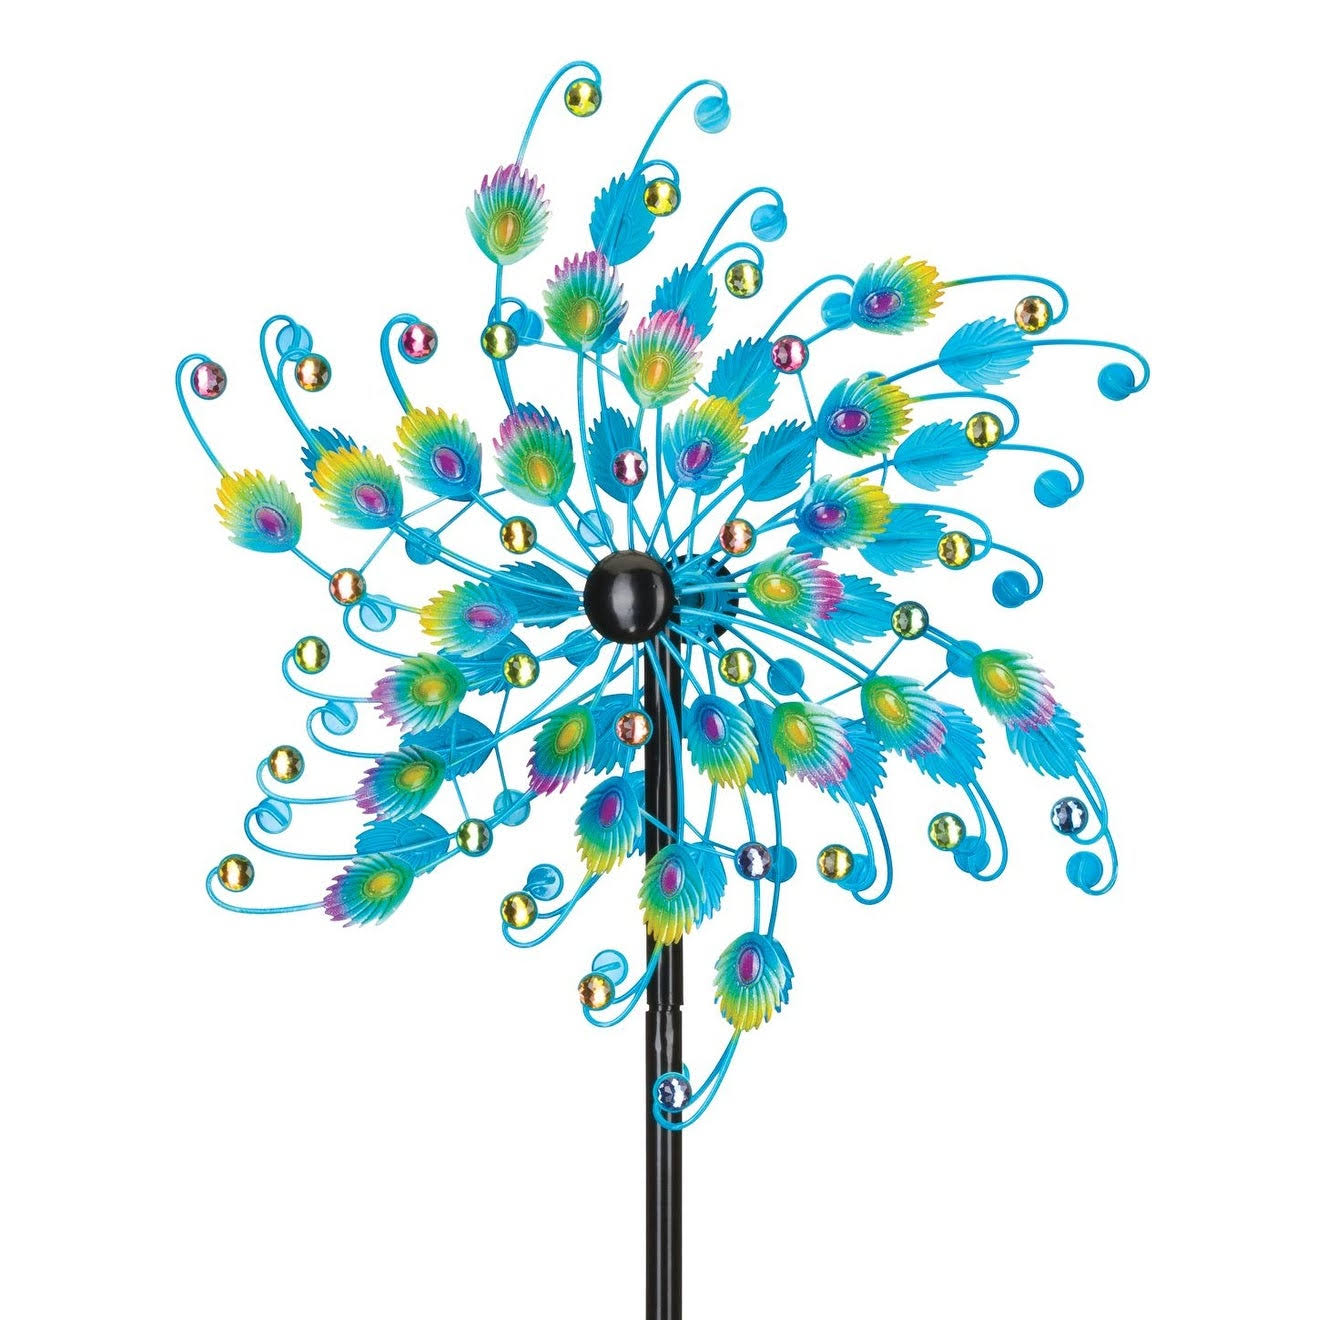 24 Rotating Wind Spinner - Jeweled Peacock - 24"x9.5"x72" - Blue - Metal